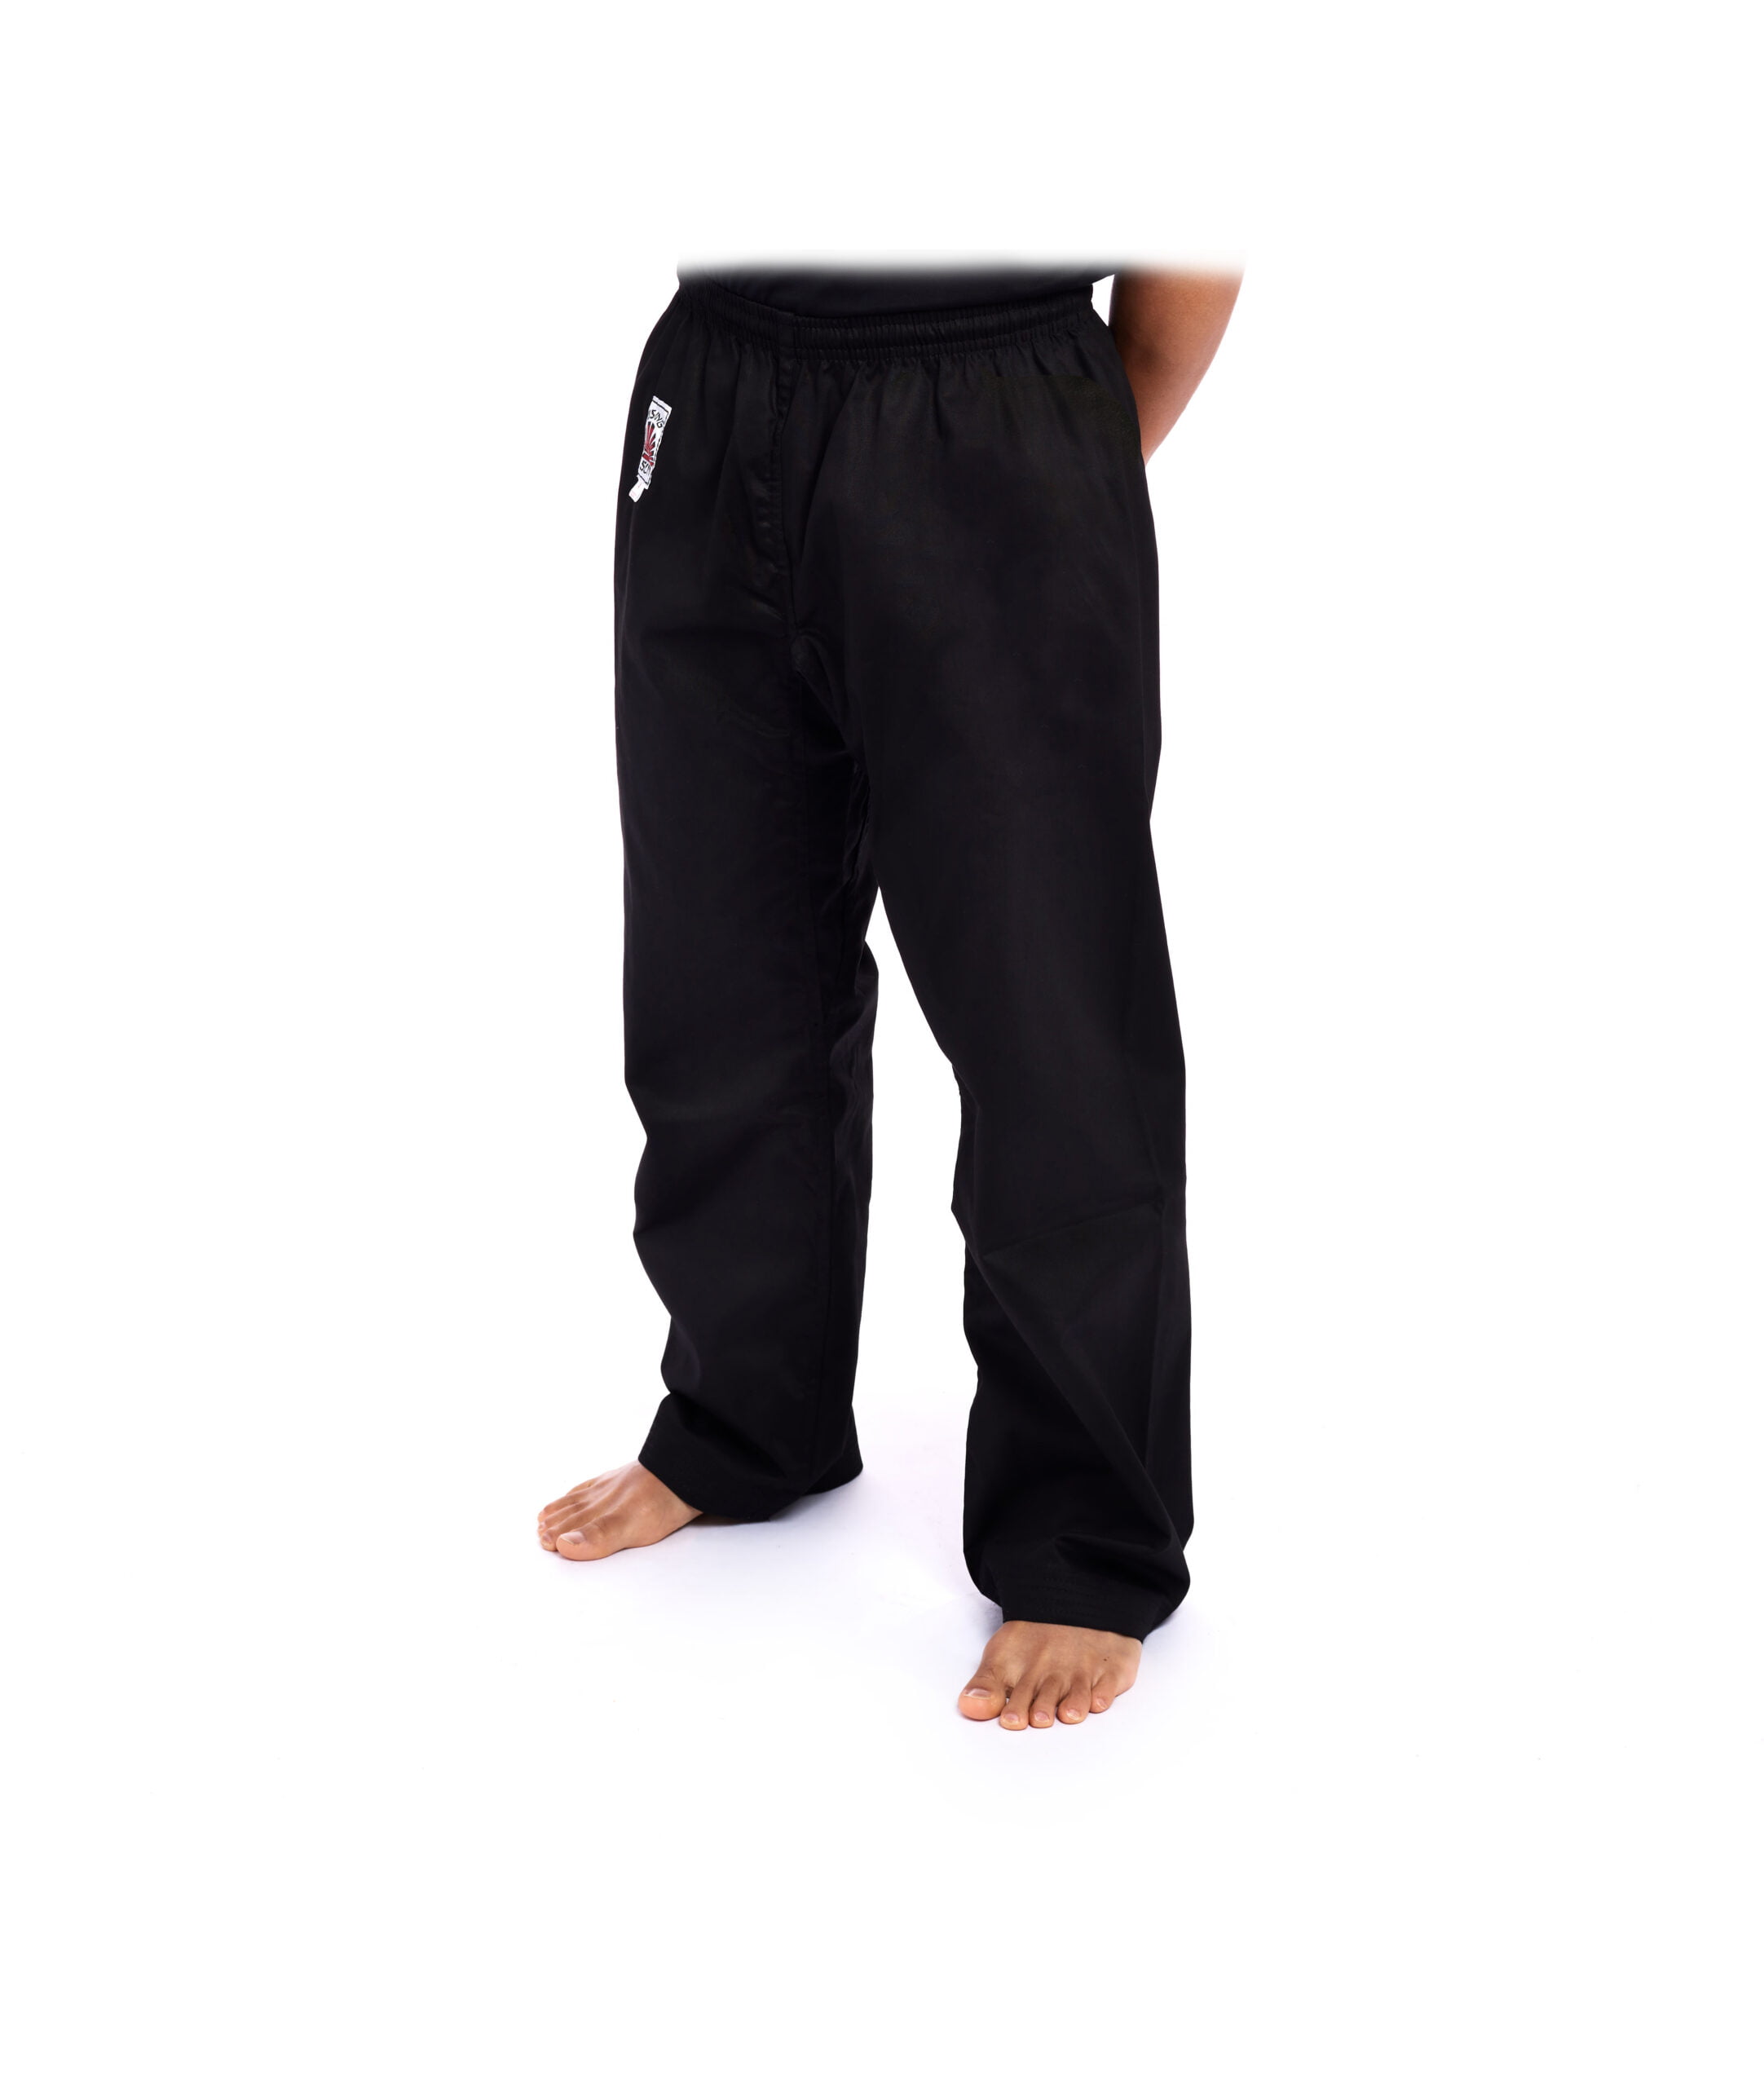 Buy ChoCho Karate Gi Pants for Adult & Kids Martial Arts Pants Student  Elastic Waist Karate Trousers, White, 4 at Amazon.in